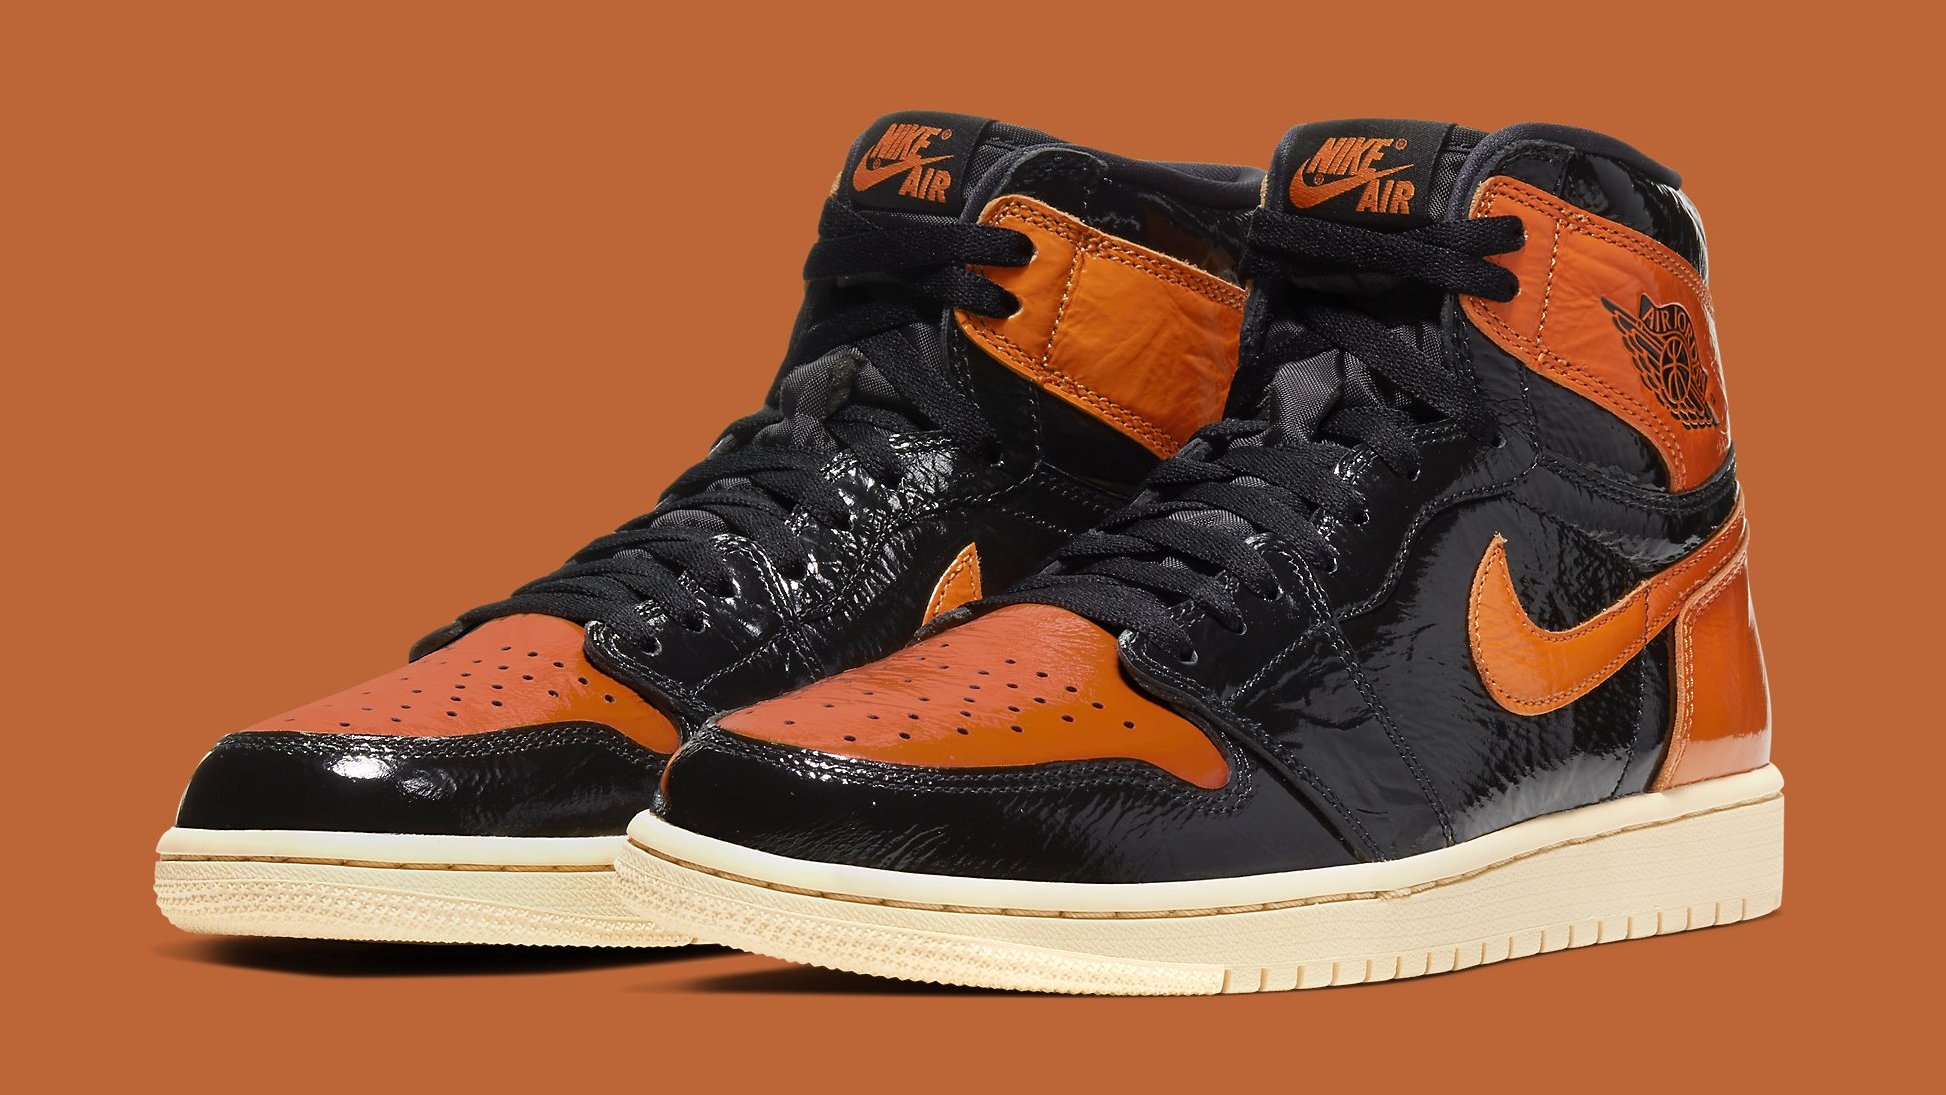 Best Look Yet at the 'Shattered Backboard 3.0' Air Jordan 1 | Complex